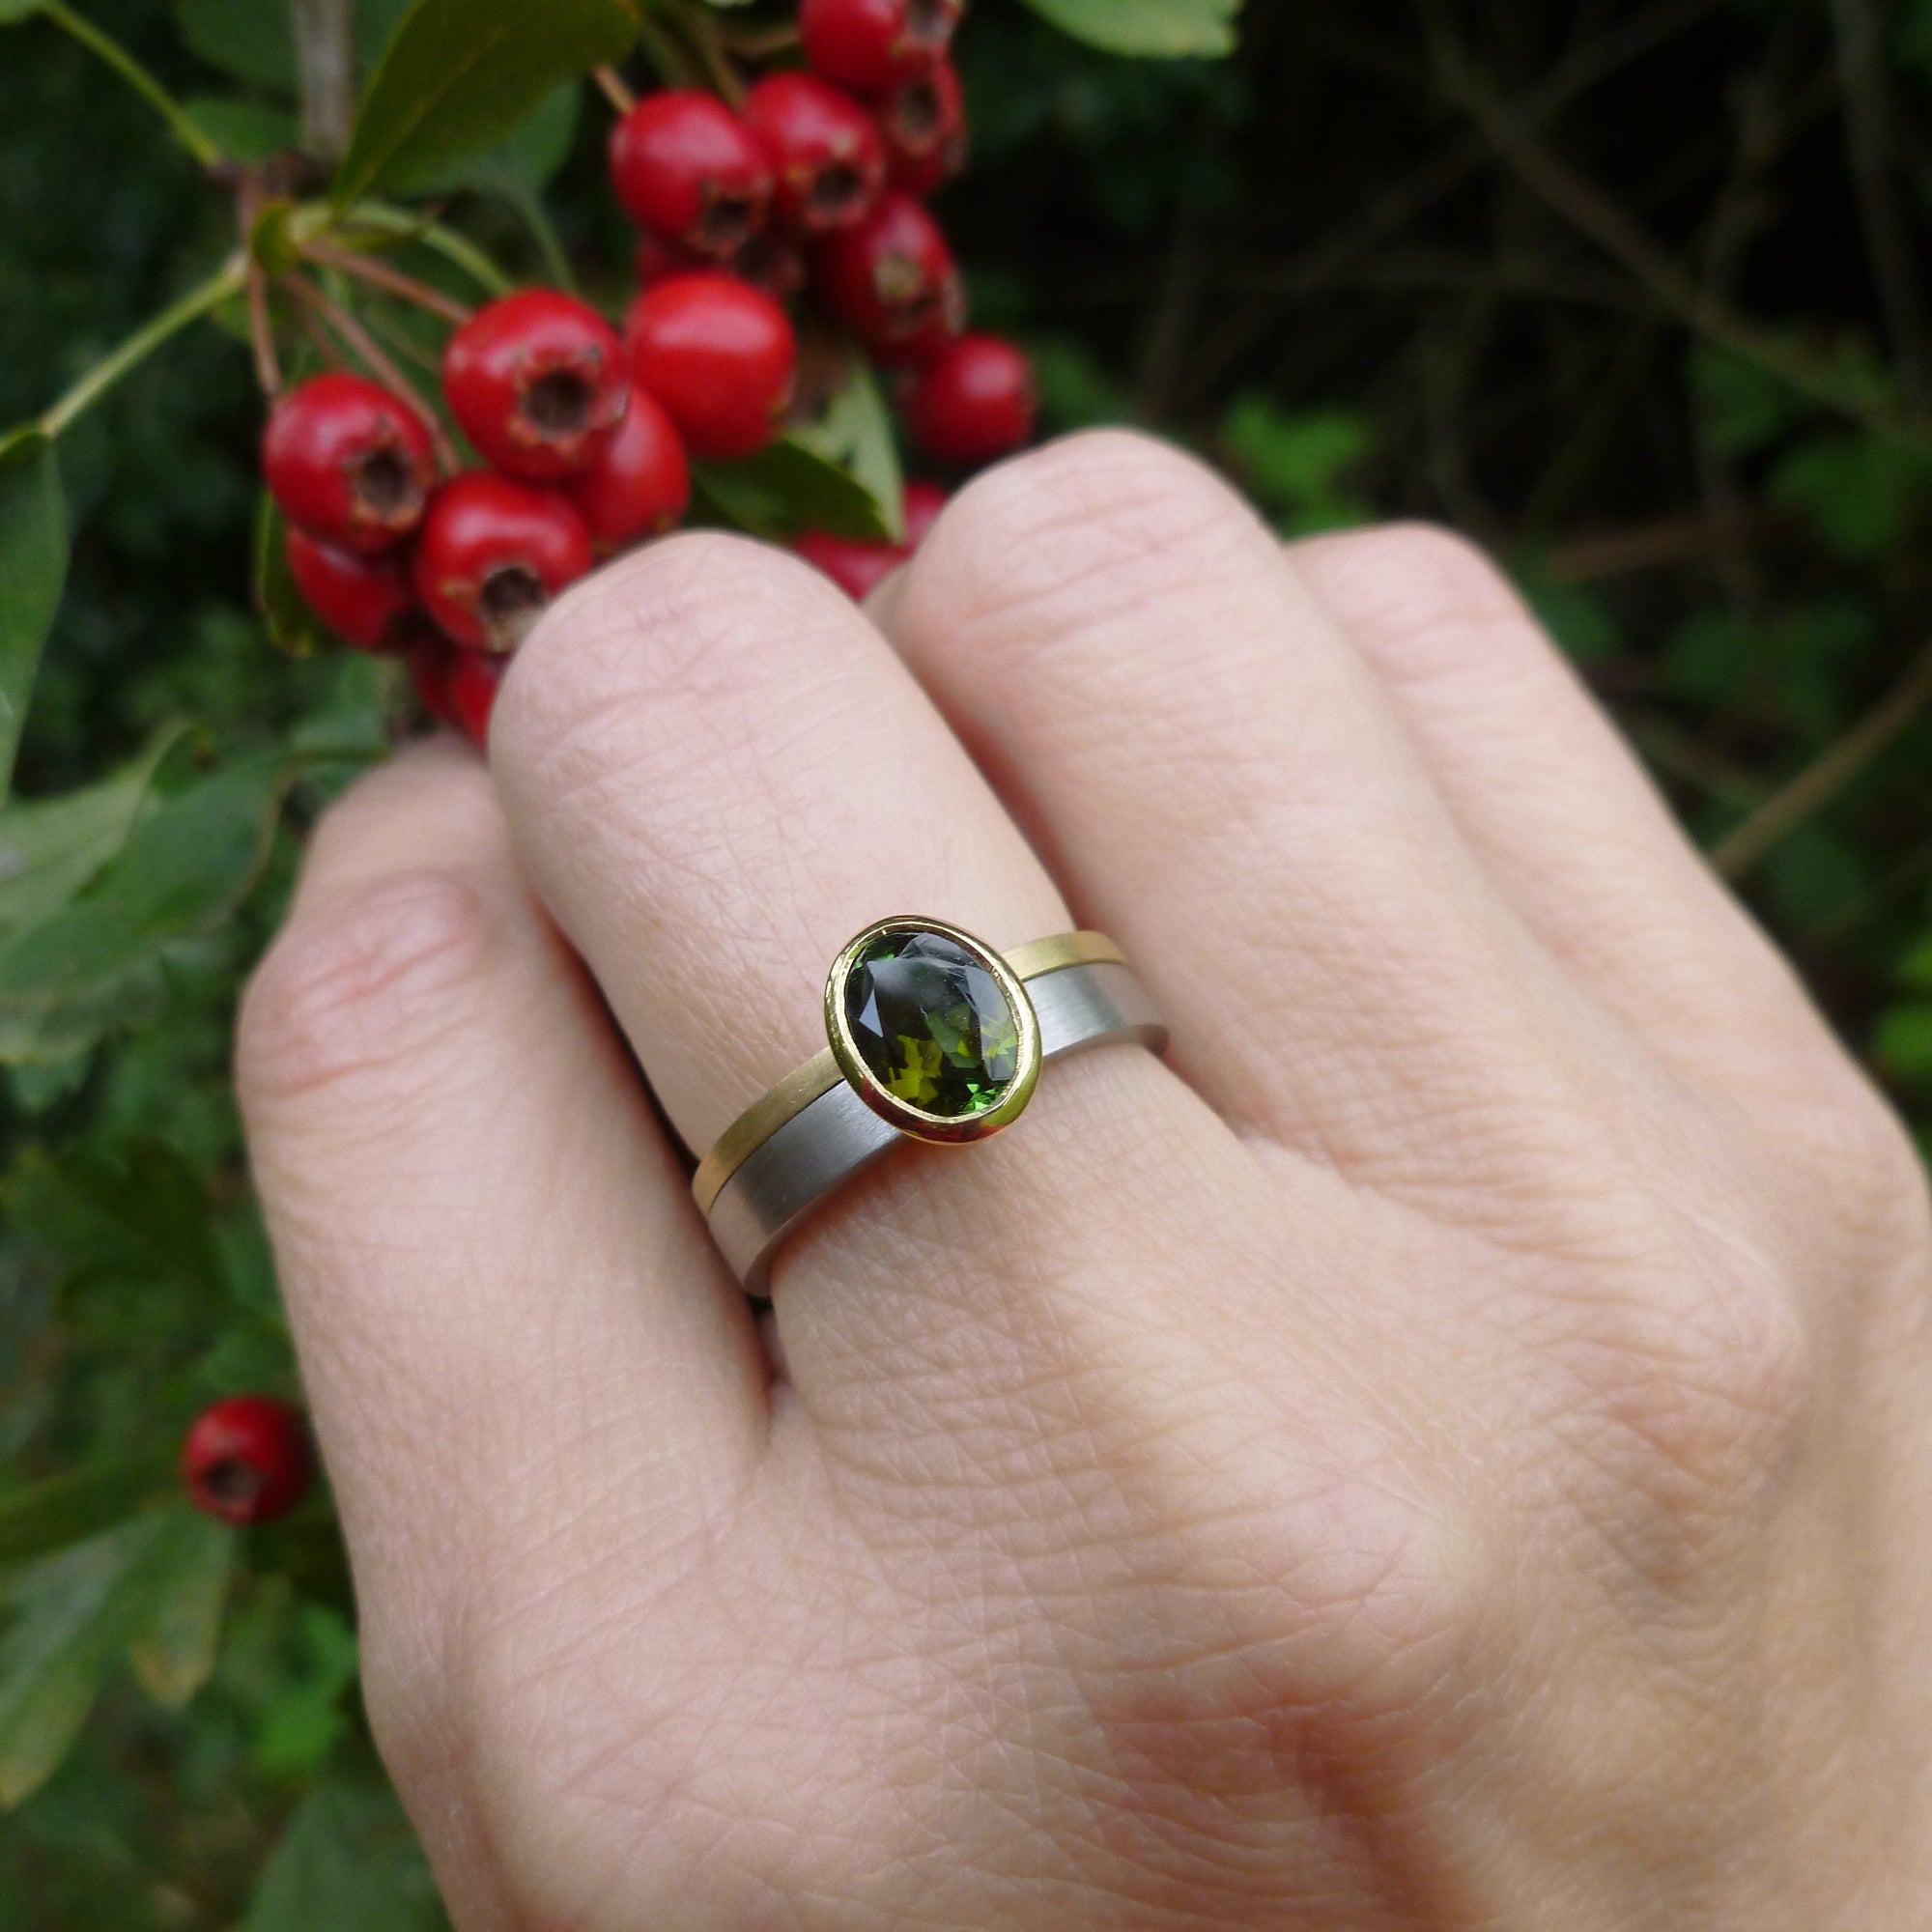 18ct white and yellow gold stacking ring with bottle green tourmaline